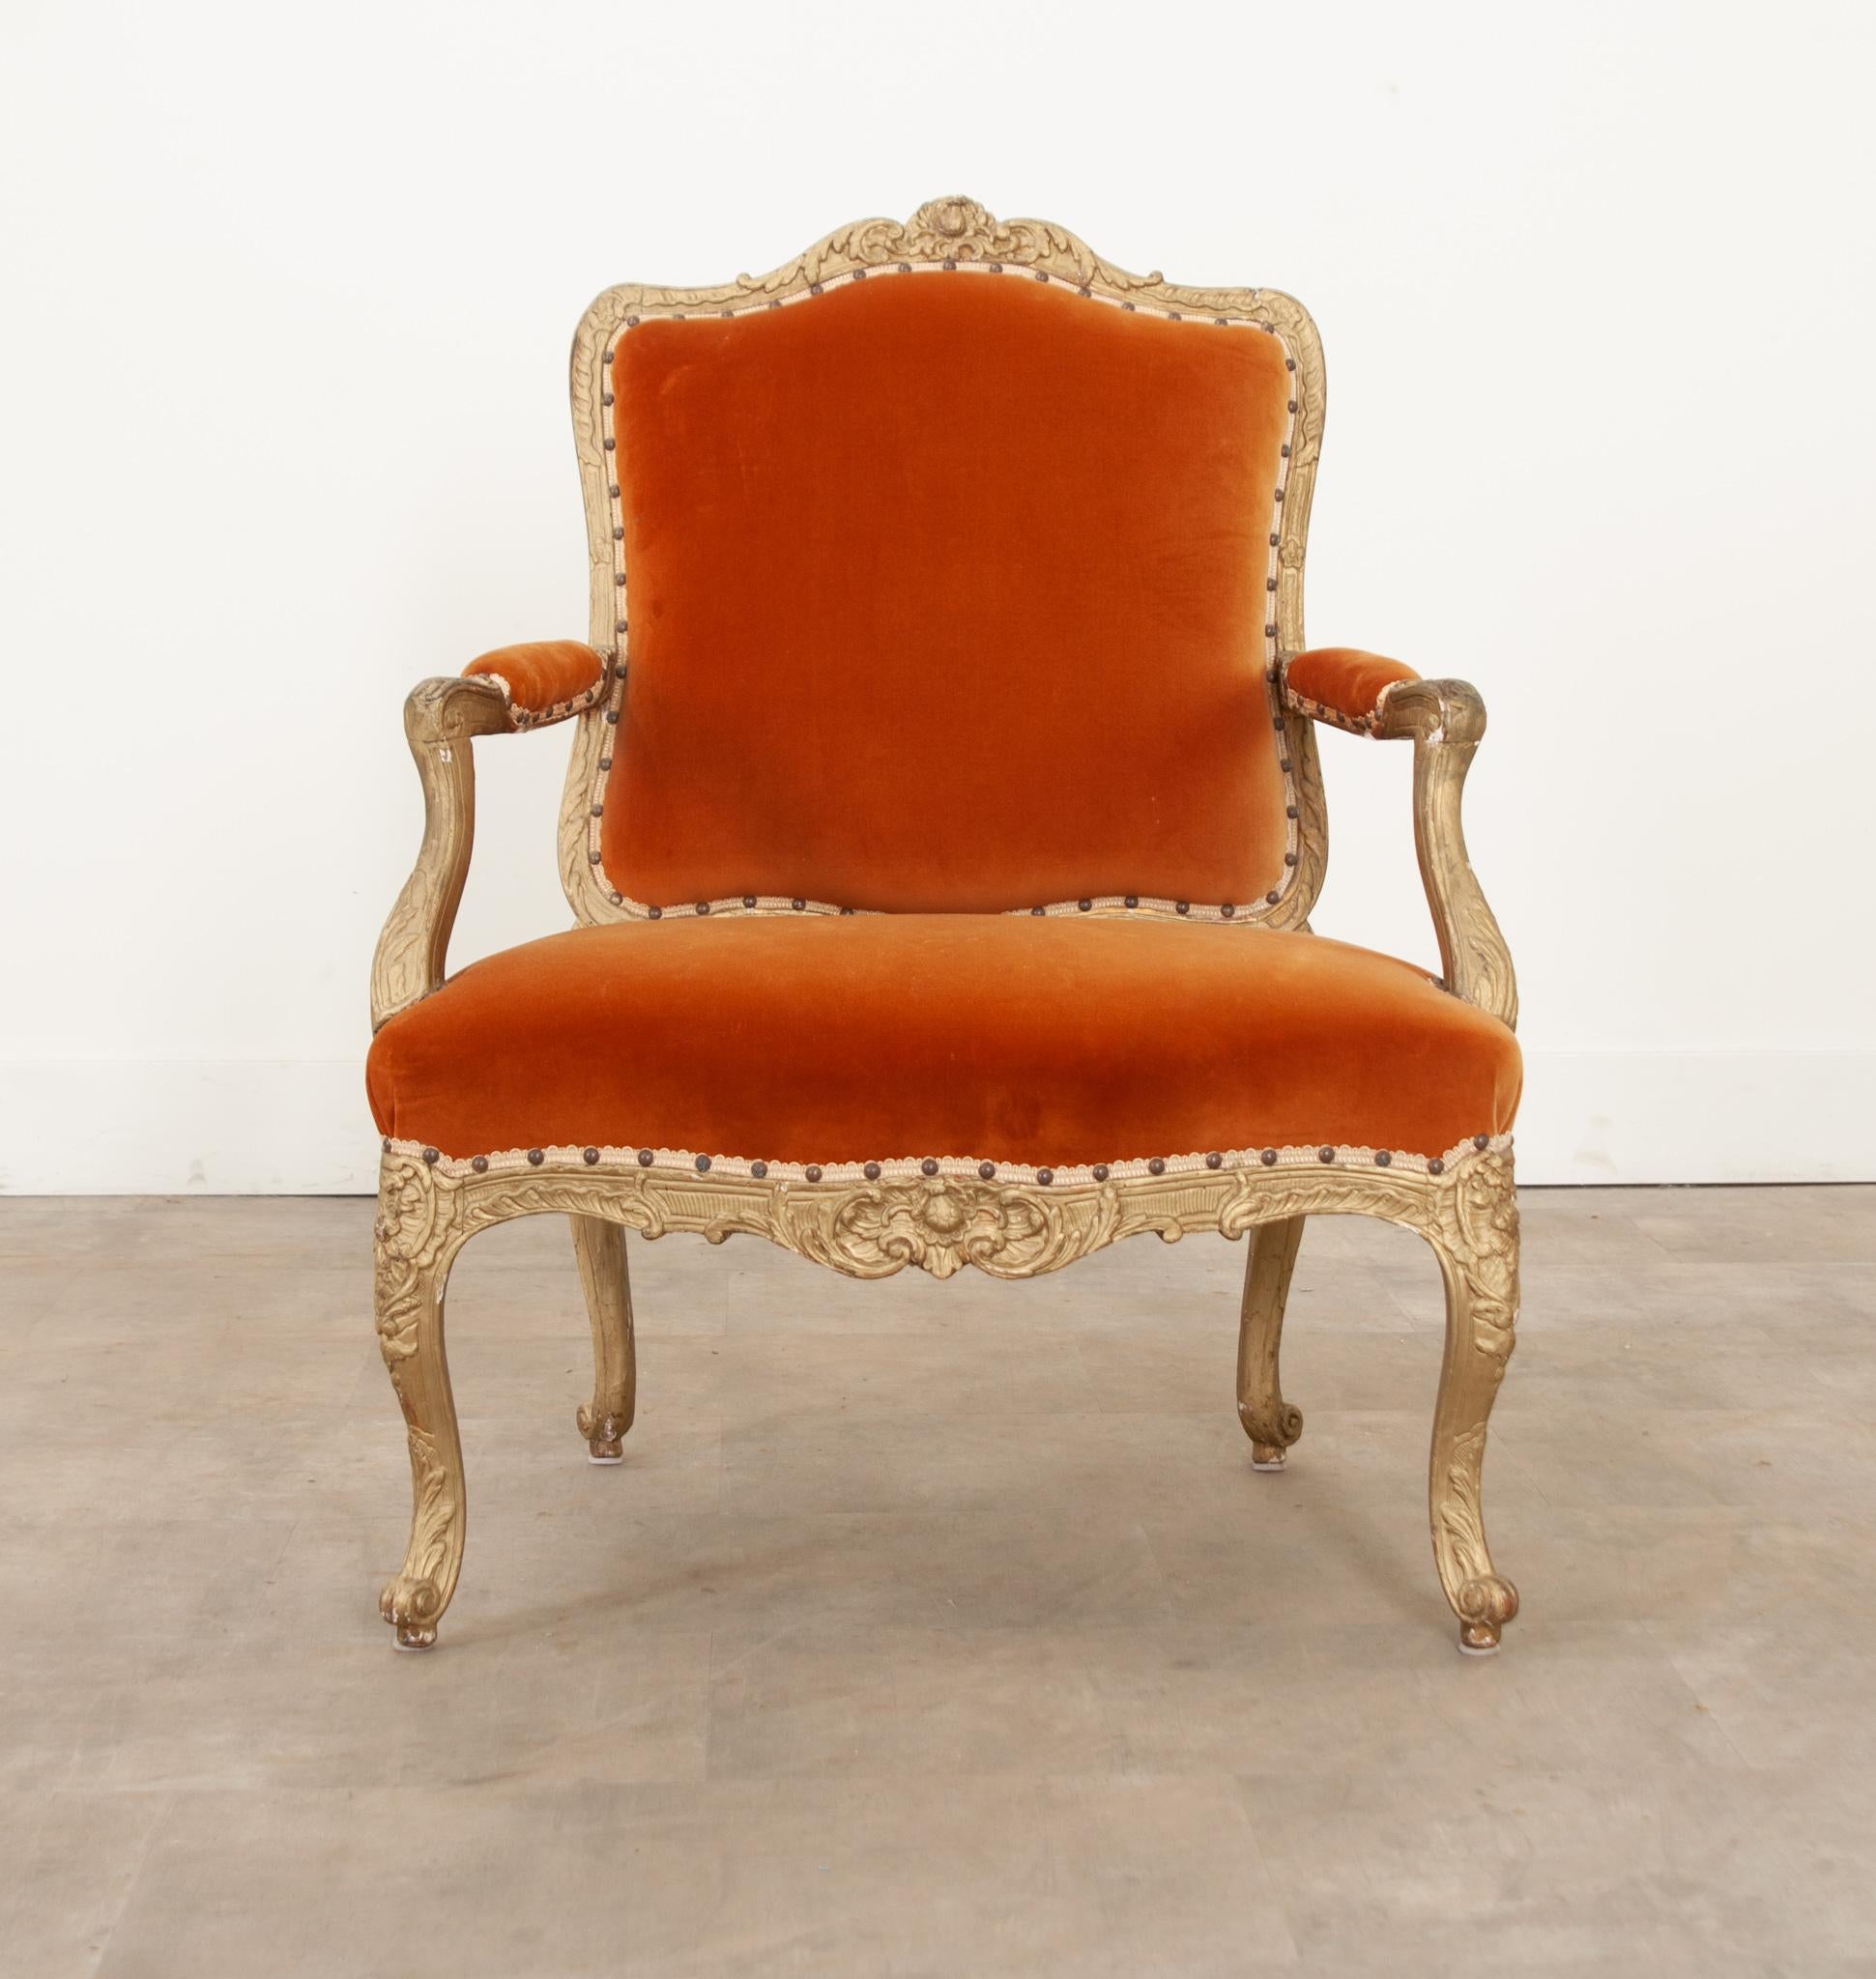 A fantastic and regal French Louis XV style painted fauteuil recently upholstered. The painted gold frames have been carved with exquisite craftsmanship and feature intricate cross hatch designs, florals, rosettes, acanthus leaves and vining. The